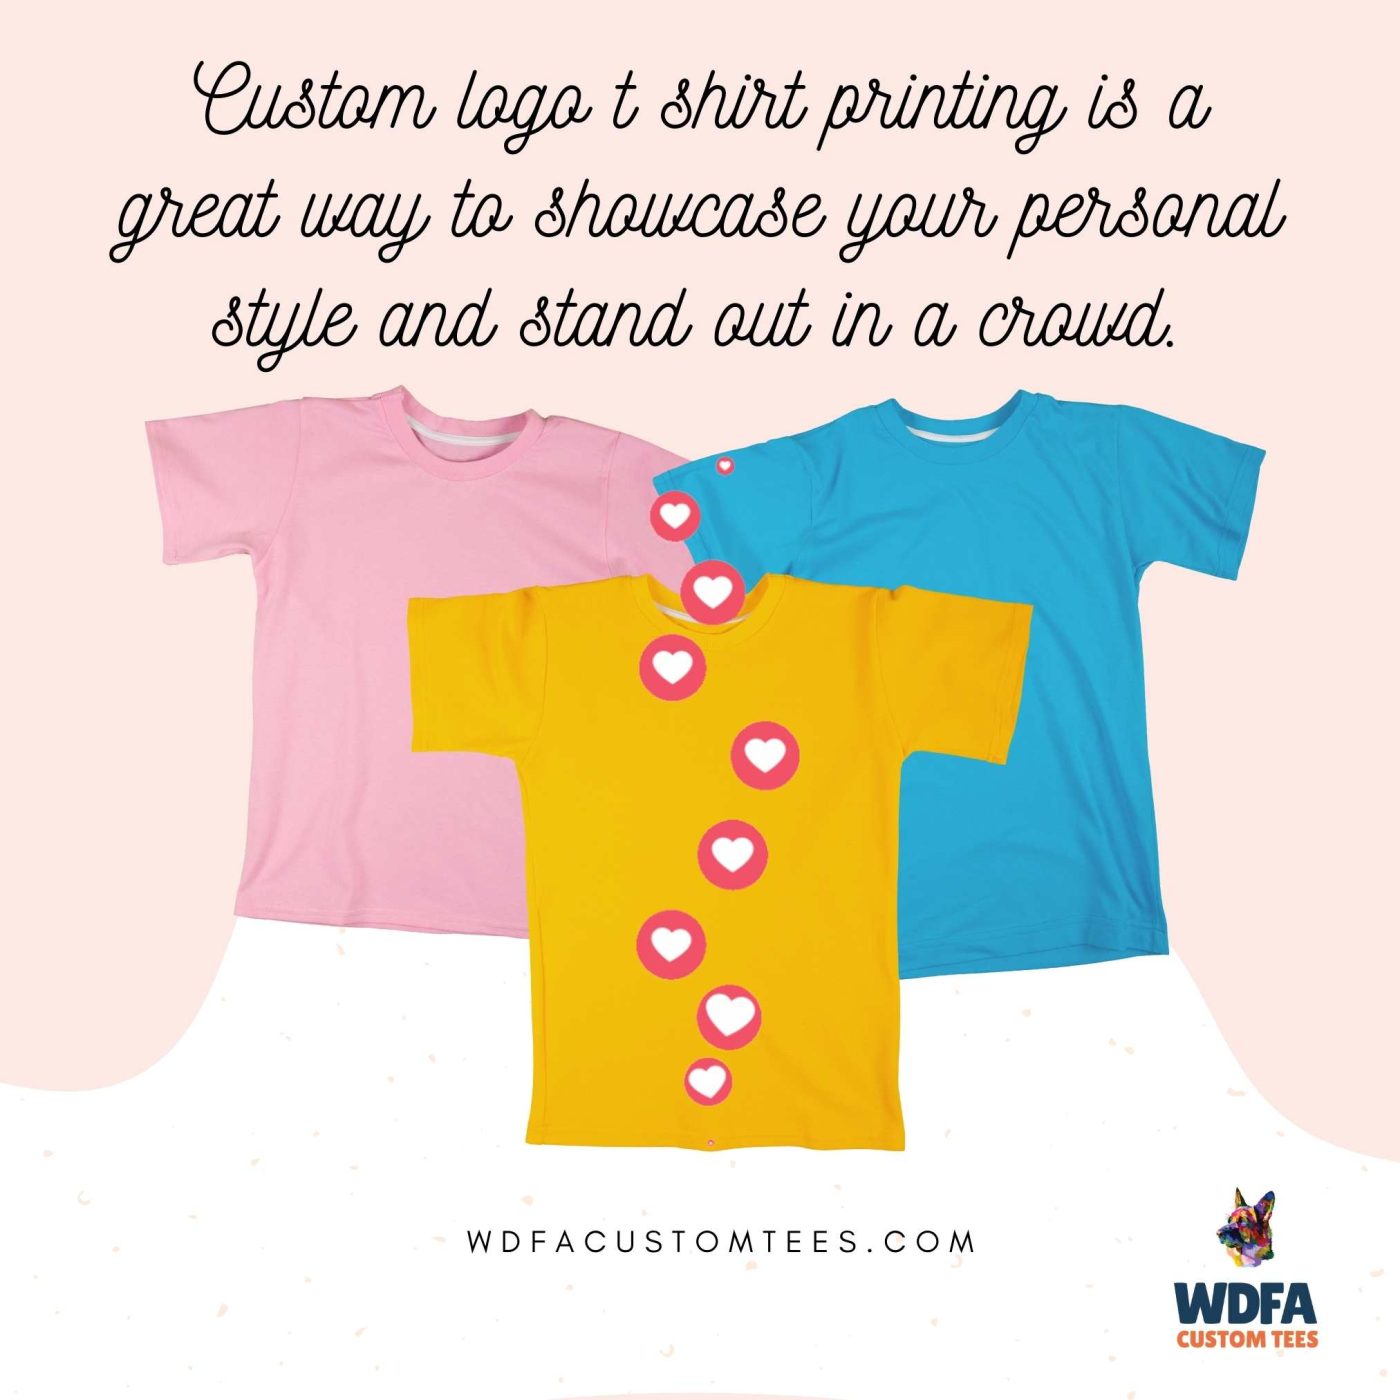  Get Your Unique Look with Custom Logo T Shirt Printing, custom logo t shirt printing, custom t shirts, t-shirt printing, tshirt printing, fremont newark union city hayward san jose san francisco, personalized t-shirts